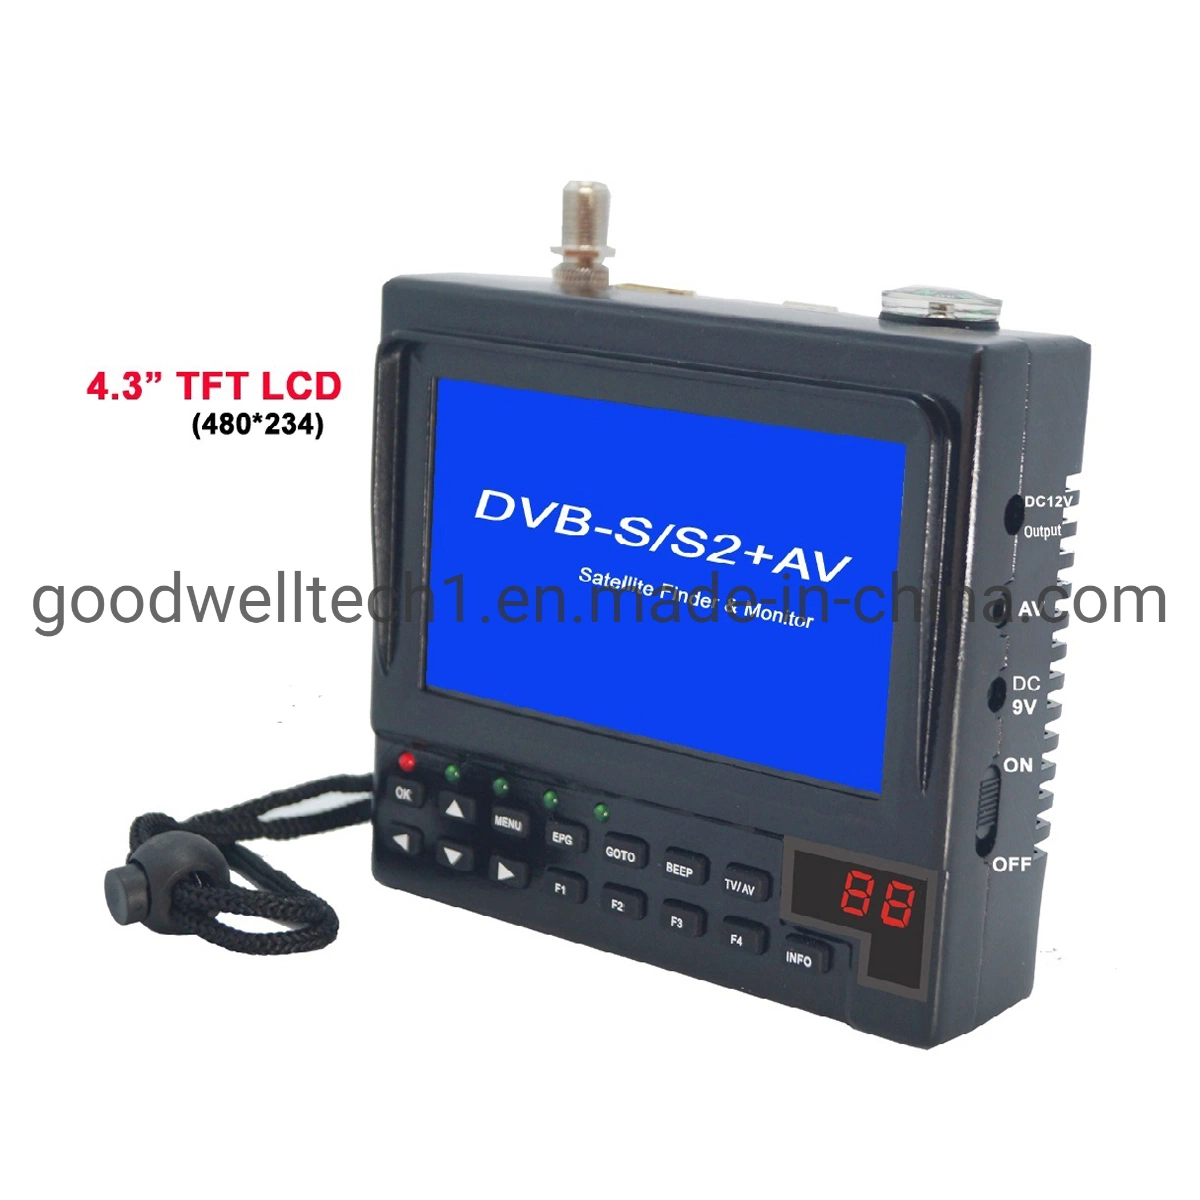 4.3 Inch TFT LCD Satellite Finder Meter with DC12V Ouput for CCTV